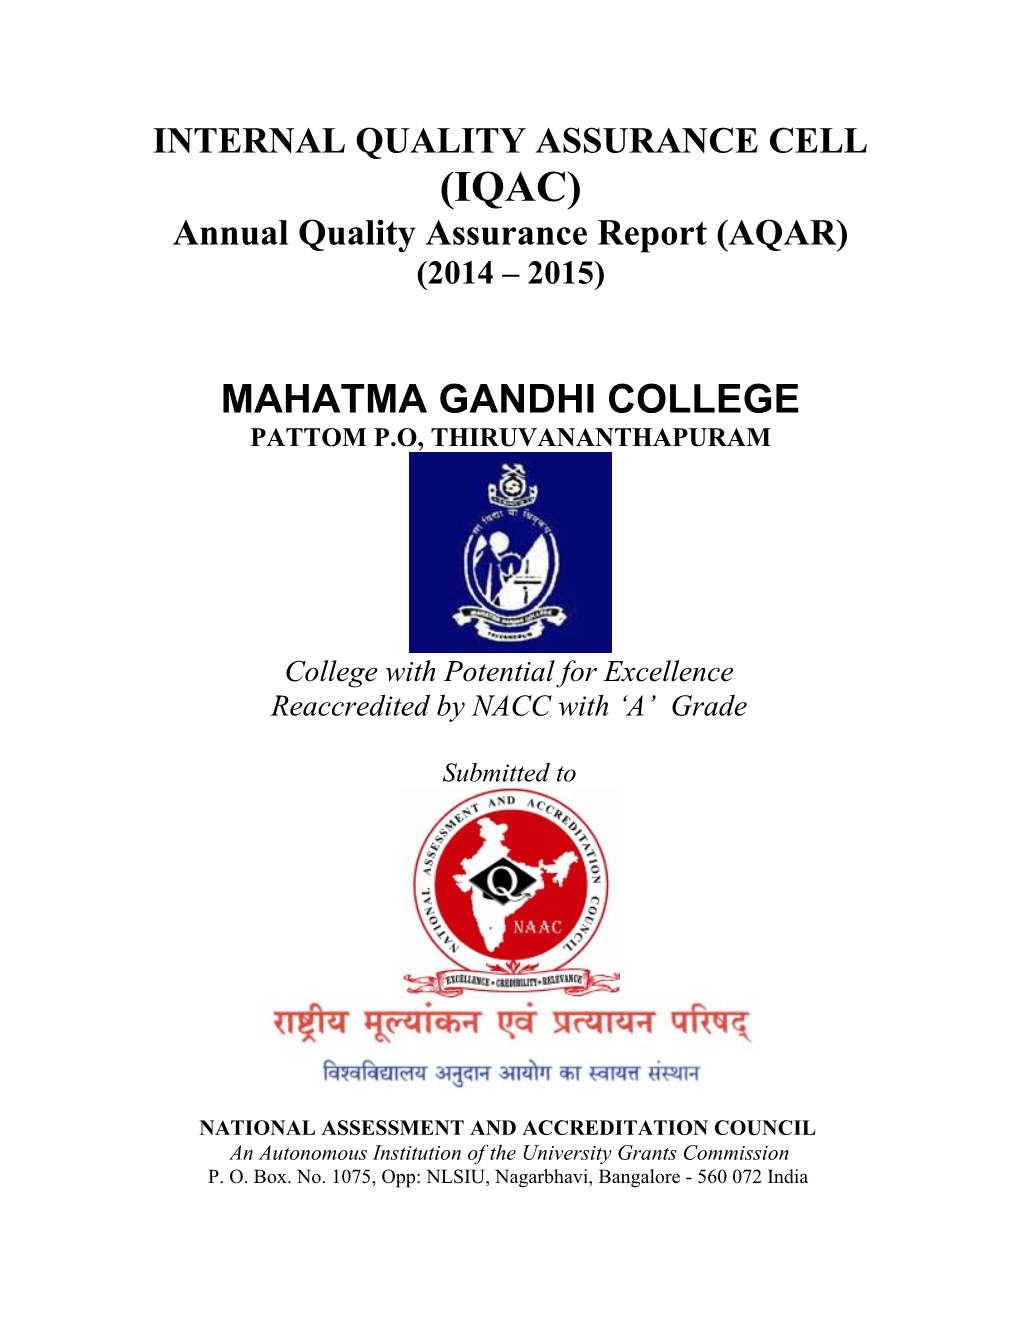 Annual Quality Assurance Report 2014-15